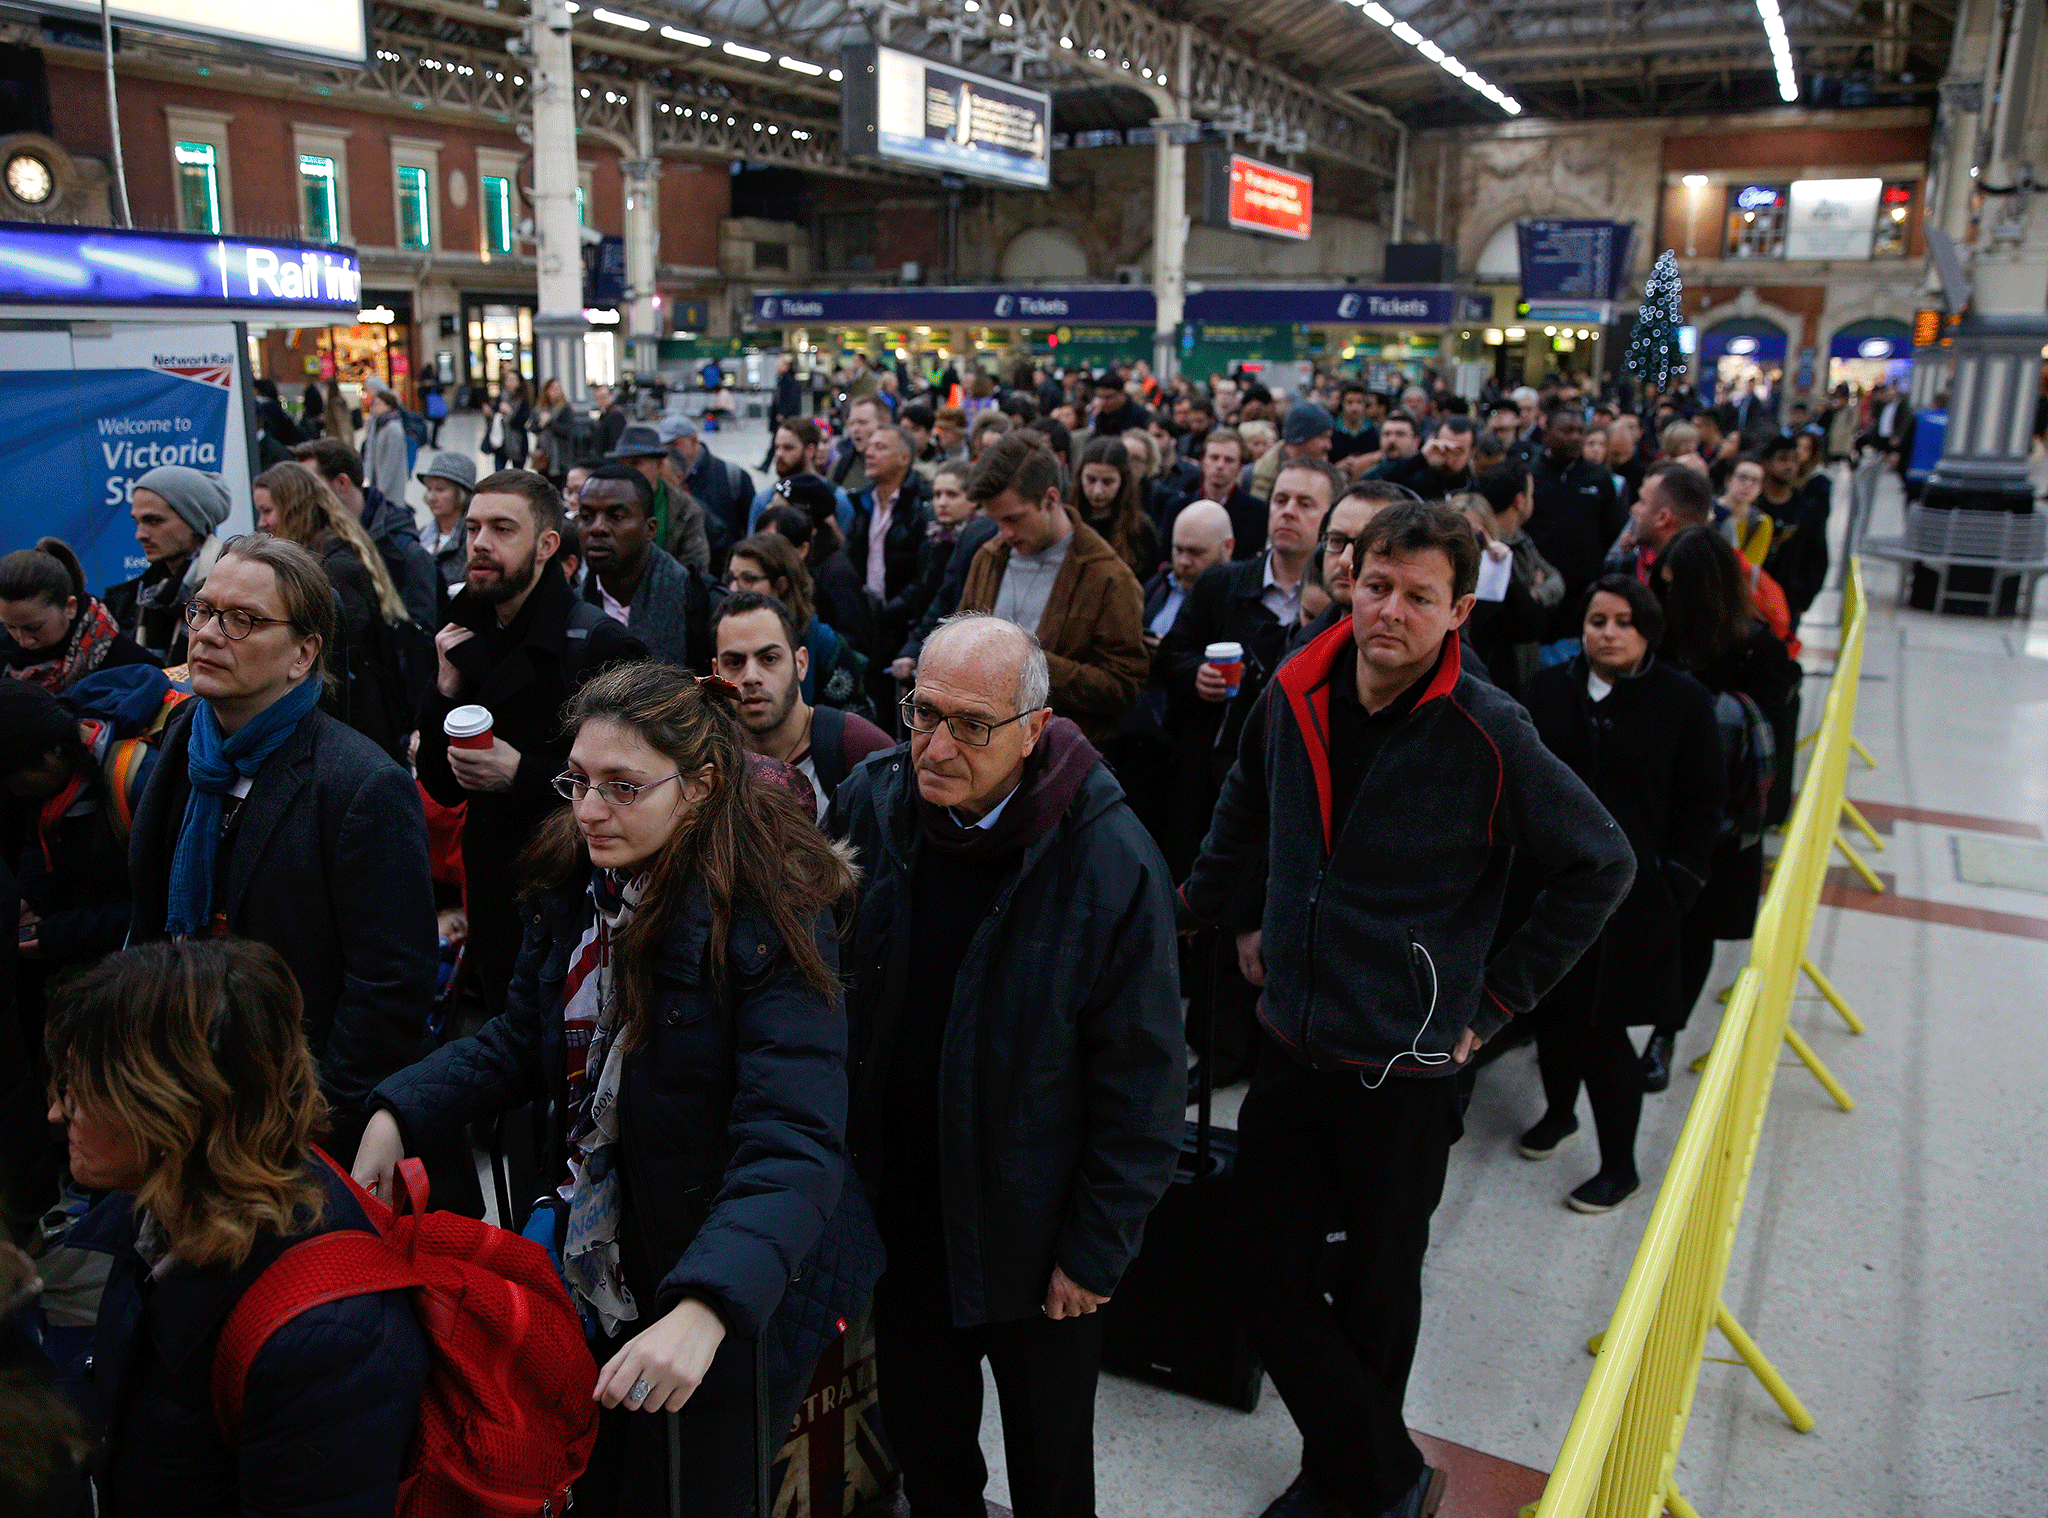 Passengers queue for a reduced Gatwick Express service during the Southern railway strike at Victoria